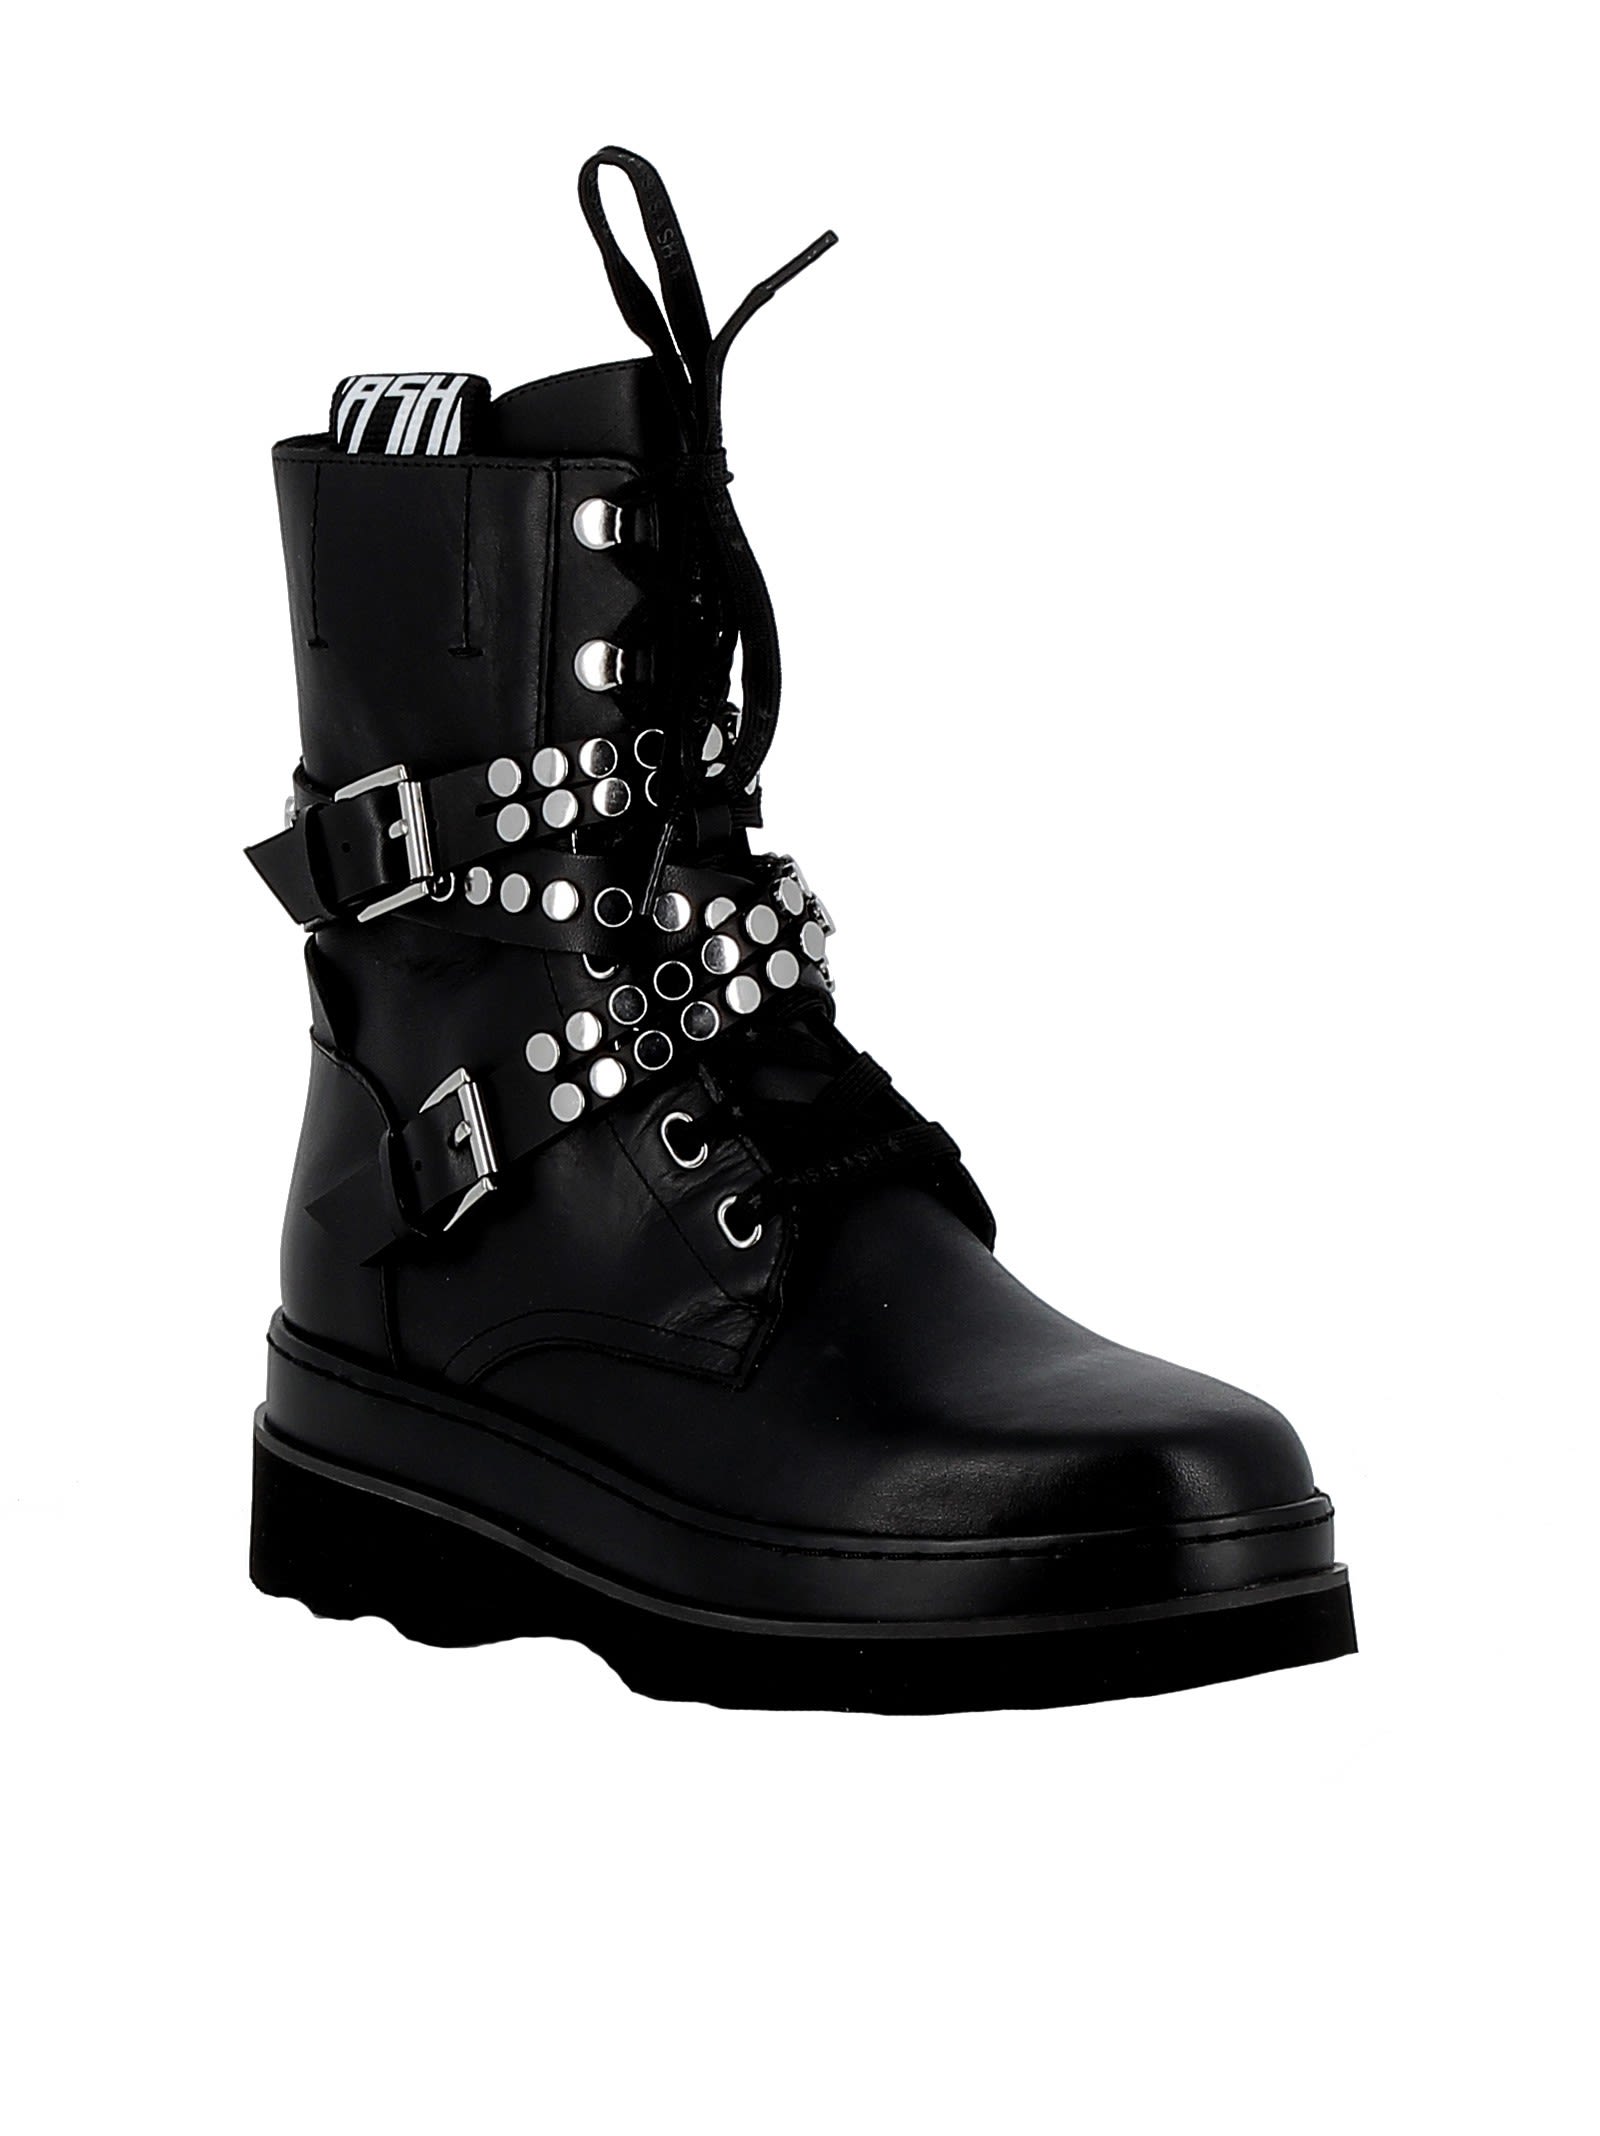 Ash Boots | italist, ALWAYS LIKE A SALE